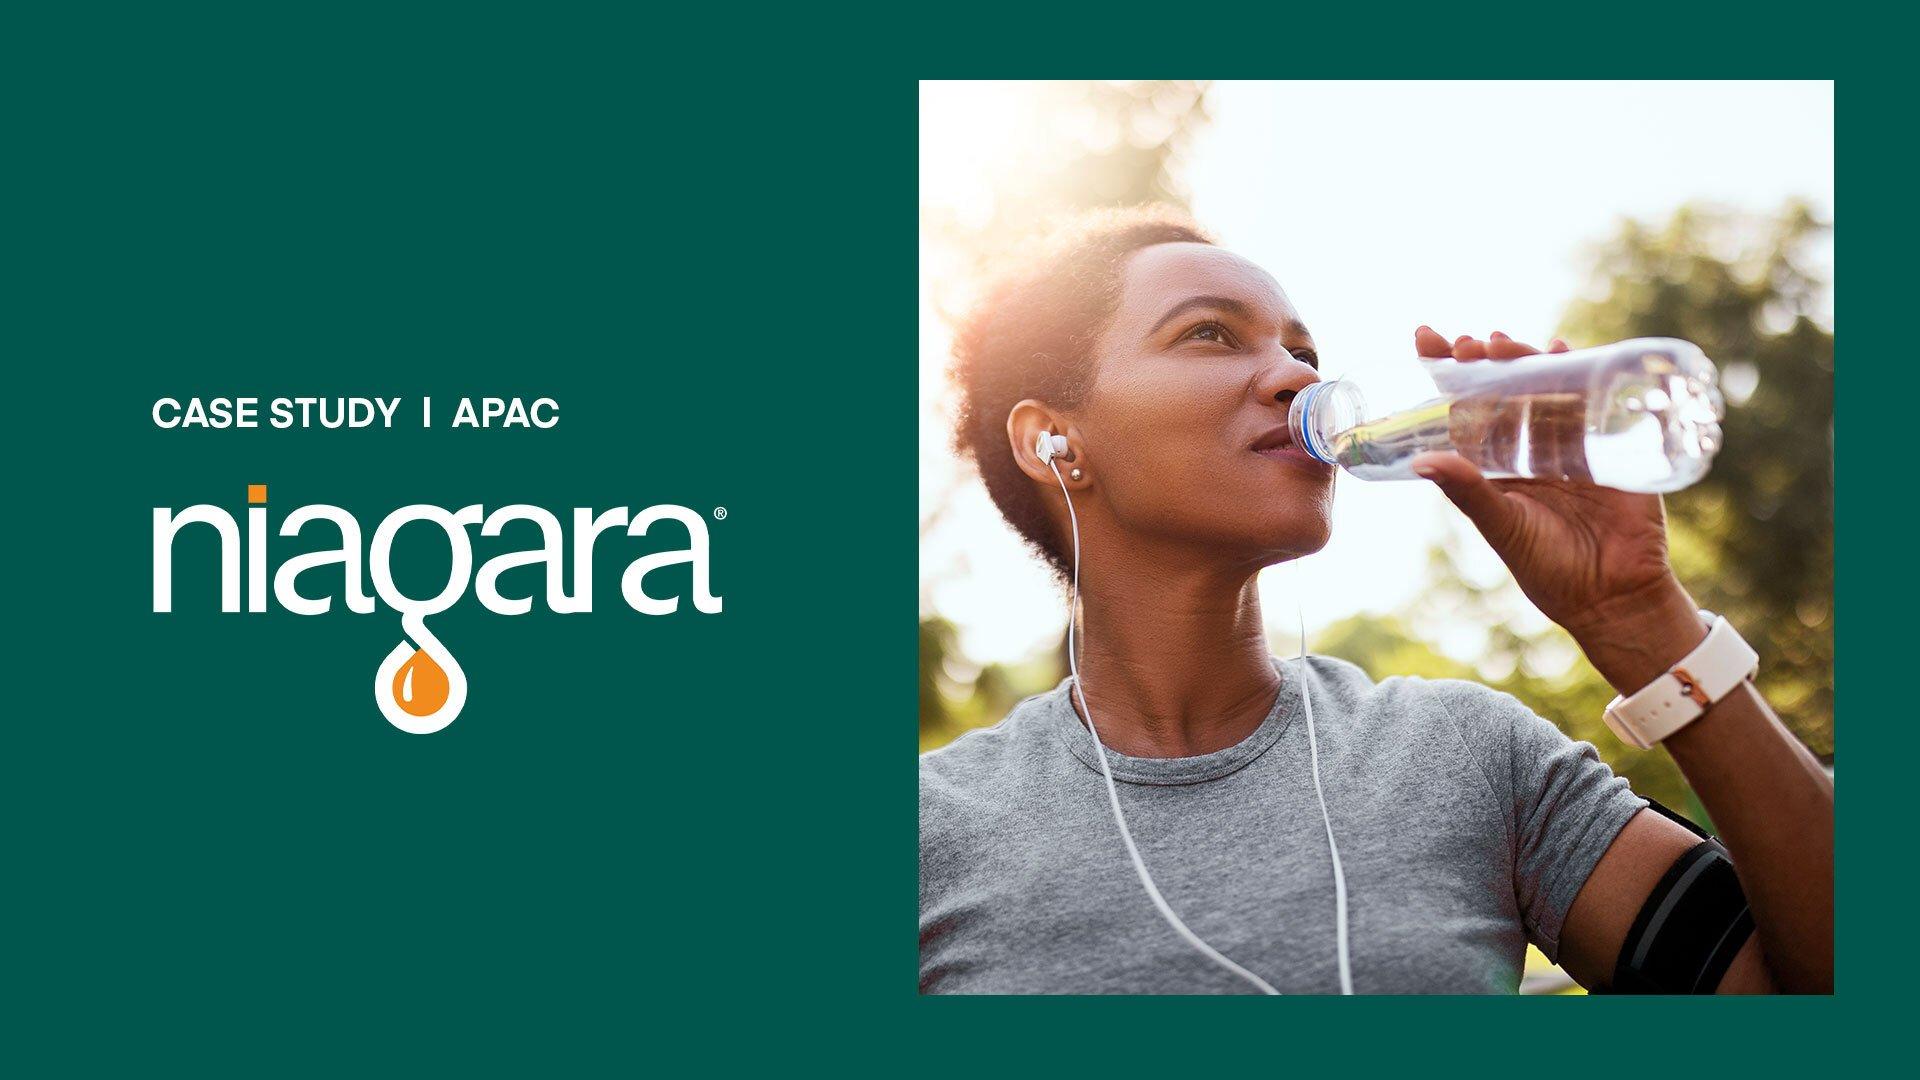 Case Study | APAC - Niagara, green background with an image of a woman drinking out of a water bottle